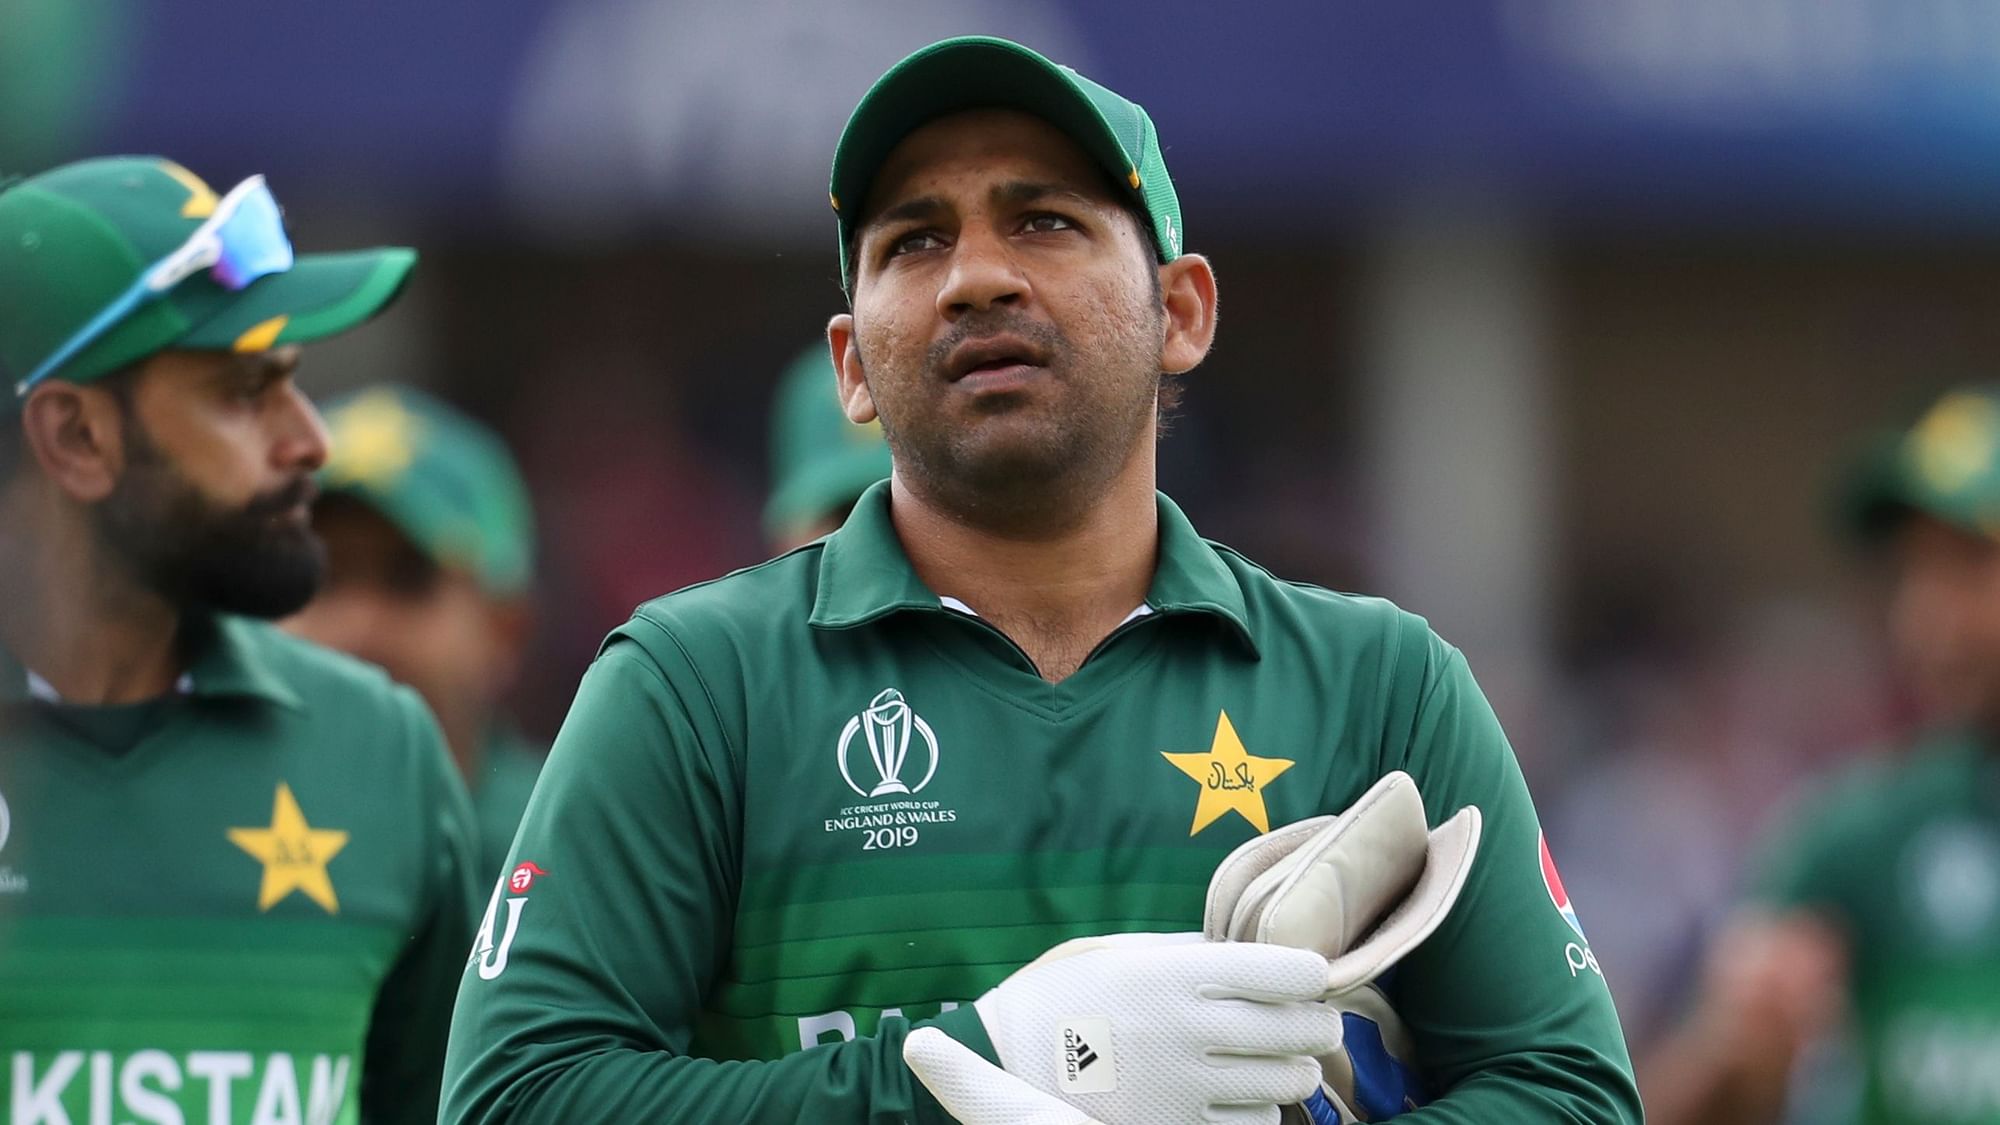 Pakistan skipper Sarfaraz Ahmed was trolled on social media after he did not pay heed to Prime Minister Imran Khan’s advise about winning the toss and batting first.